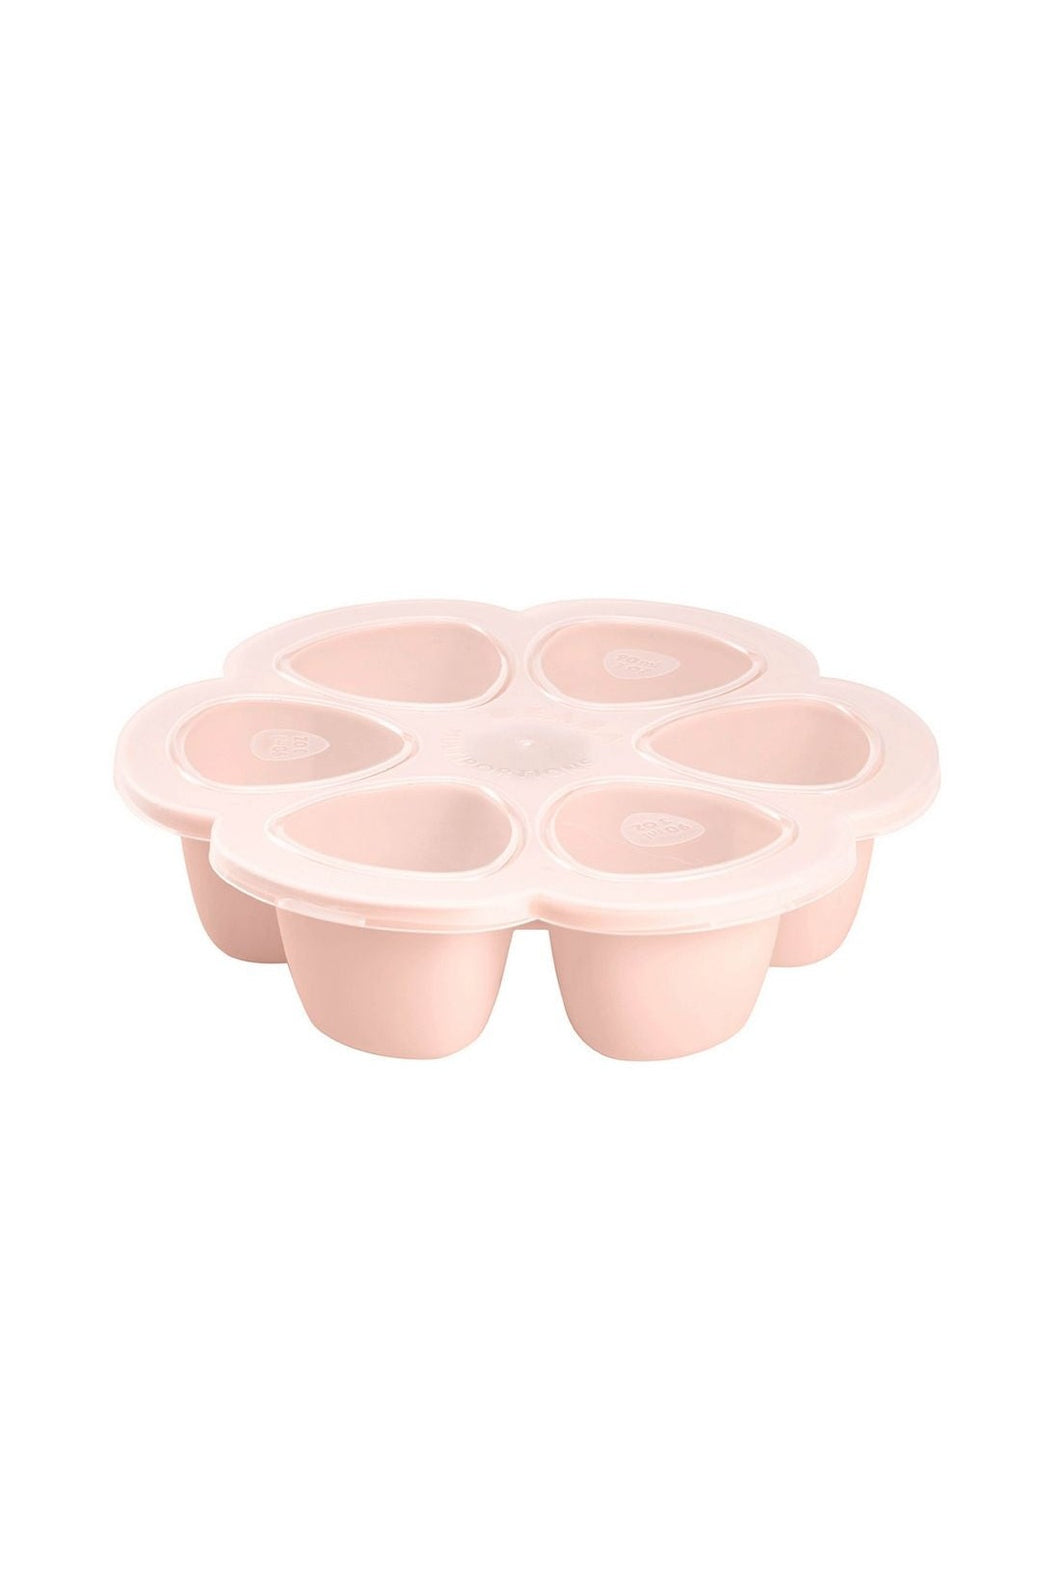 Beaba Silicone Multiportions 6 X 90 Ml Pink